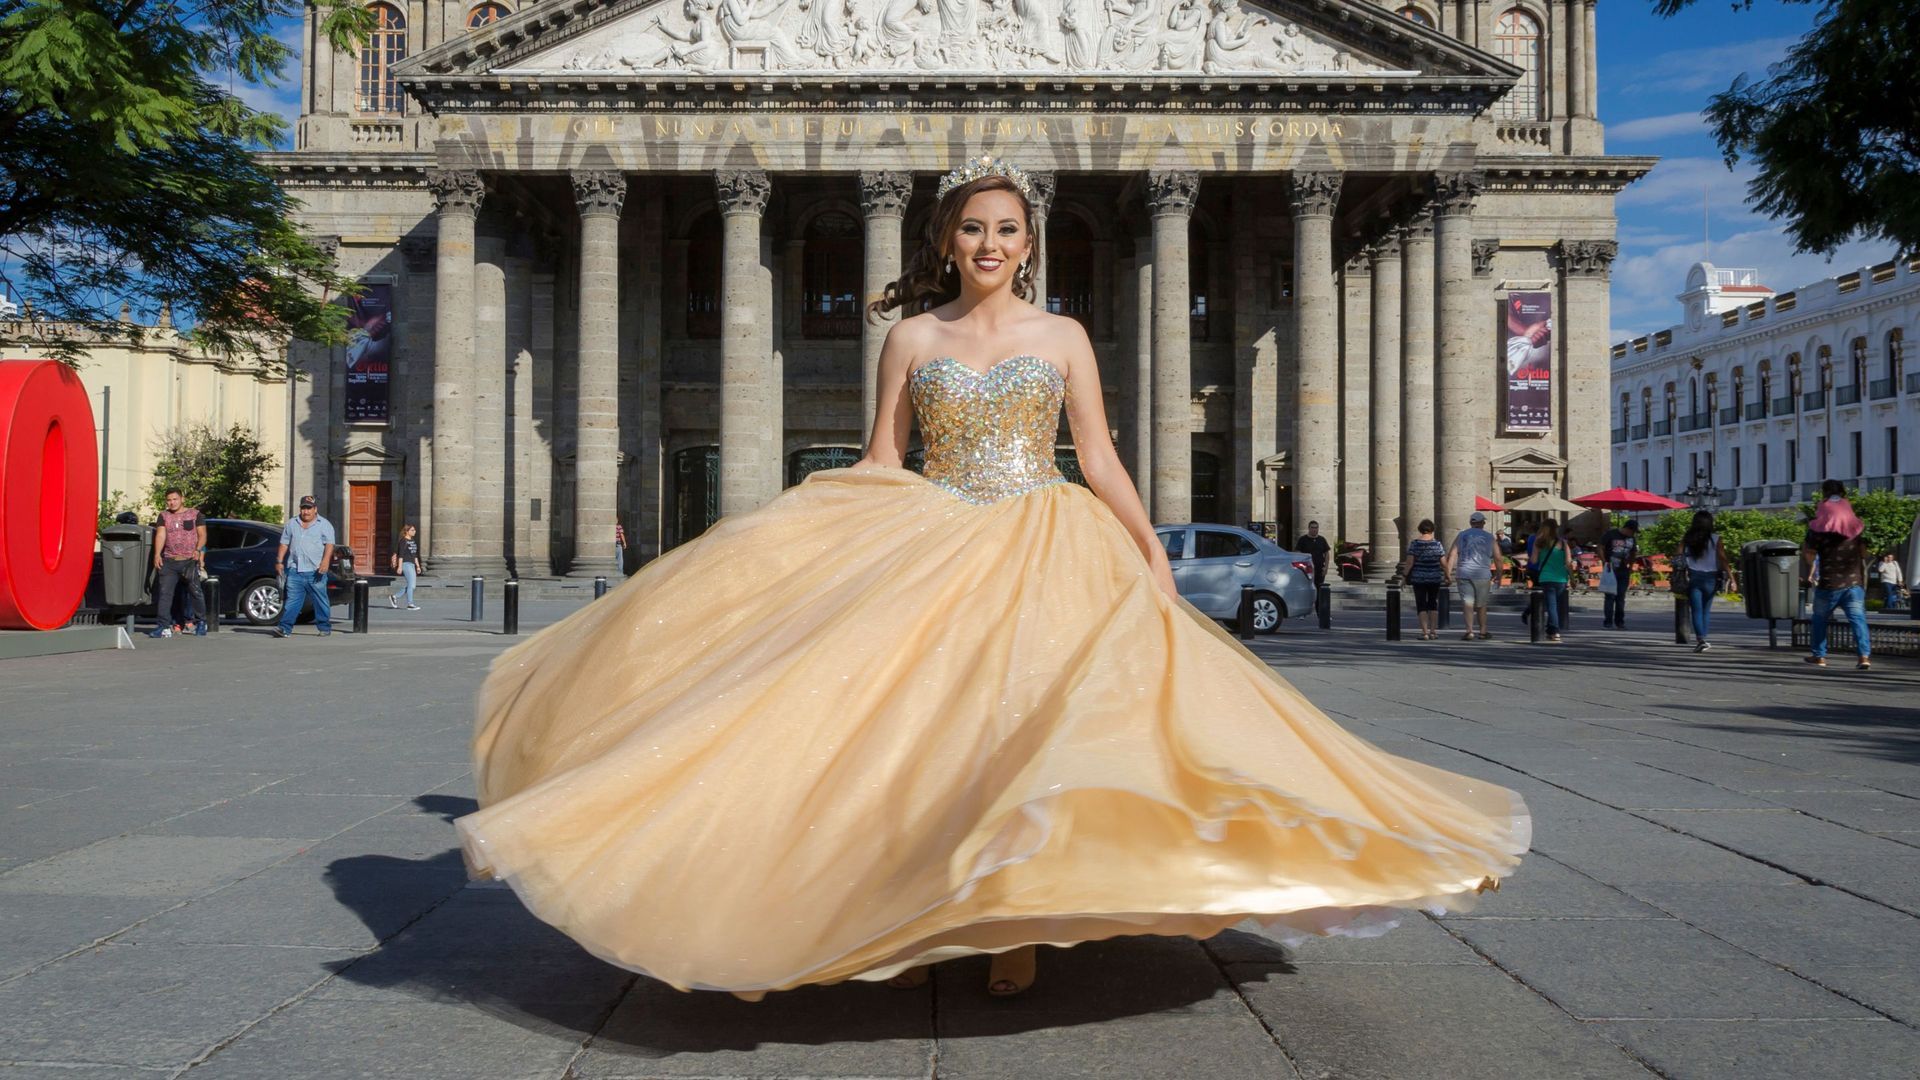 A celebrant in a stunning gold gown striking a pose for a photo shoot for her quinceanera